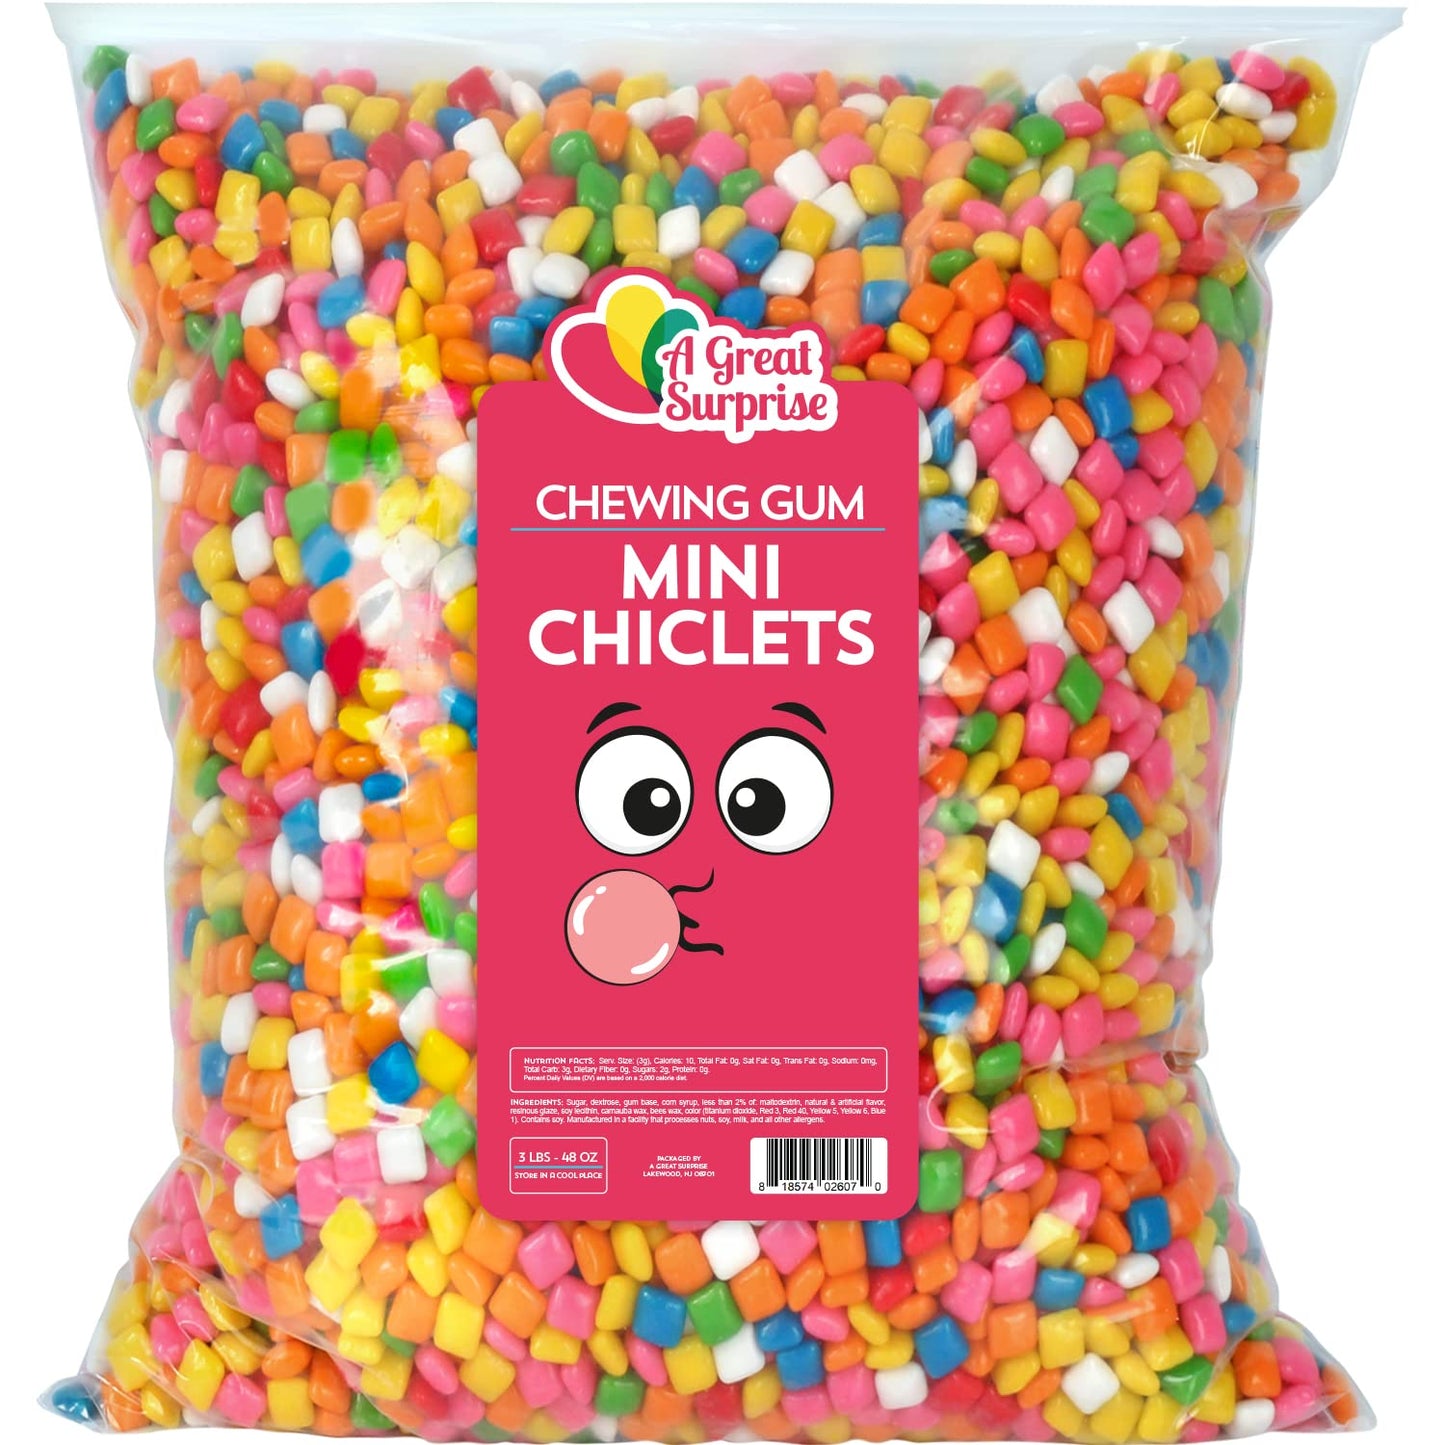 Chiclets Gum - Mini Chiclets - Chicklets Tiny Size Gum - Fruity Flavor - Gumball Candy Machine Refills - Bulk Candy - 3 LB